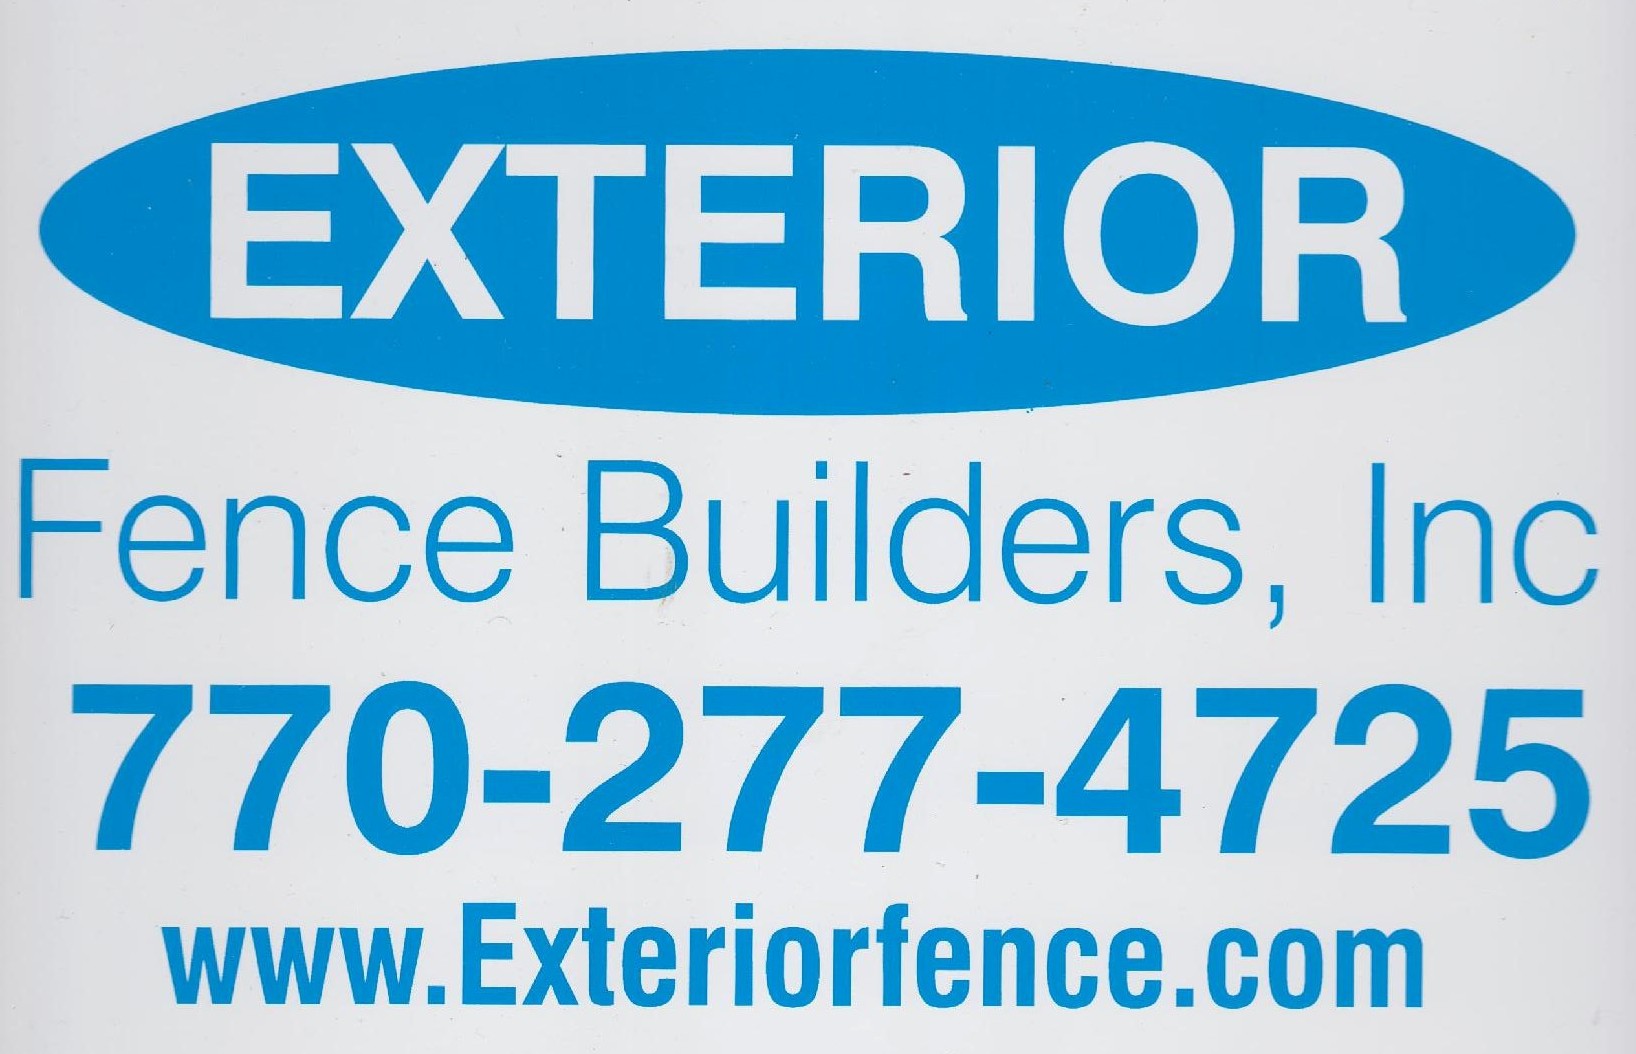 Exterior Fence Builders, Inc, Fence signs for 2012 to beyond. Exterior Fence Builders, Inc owned and managed by It's About Fences, LLC has been since 2009